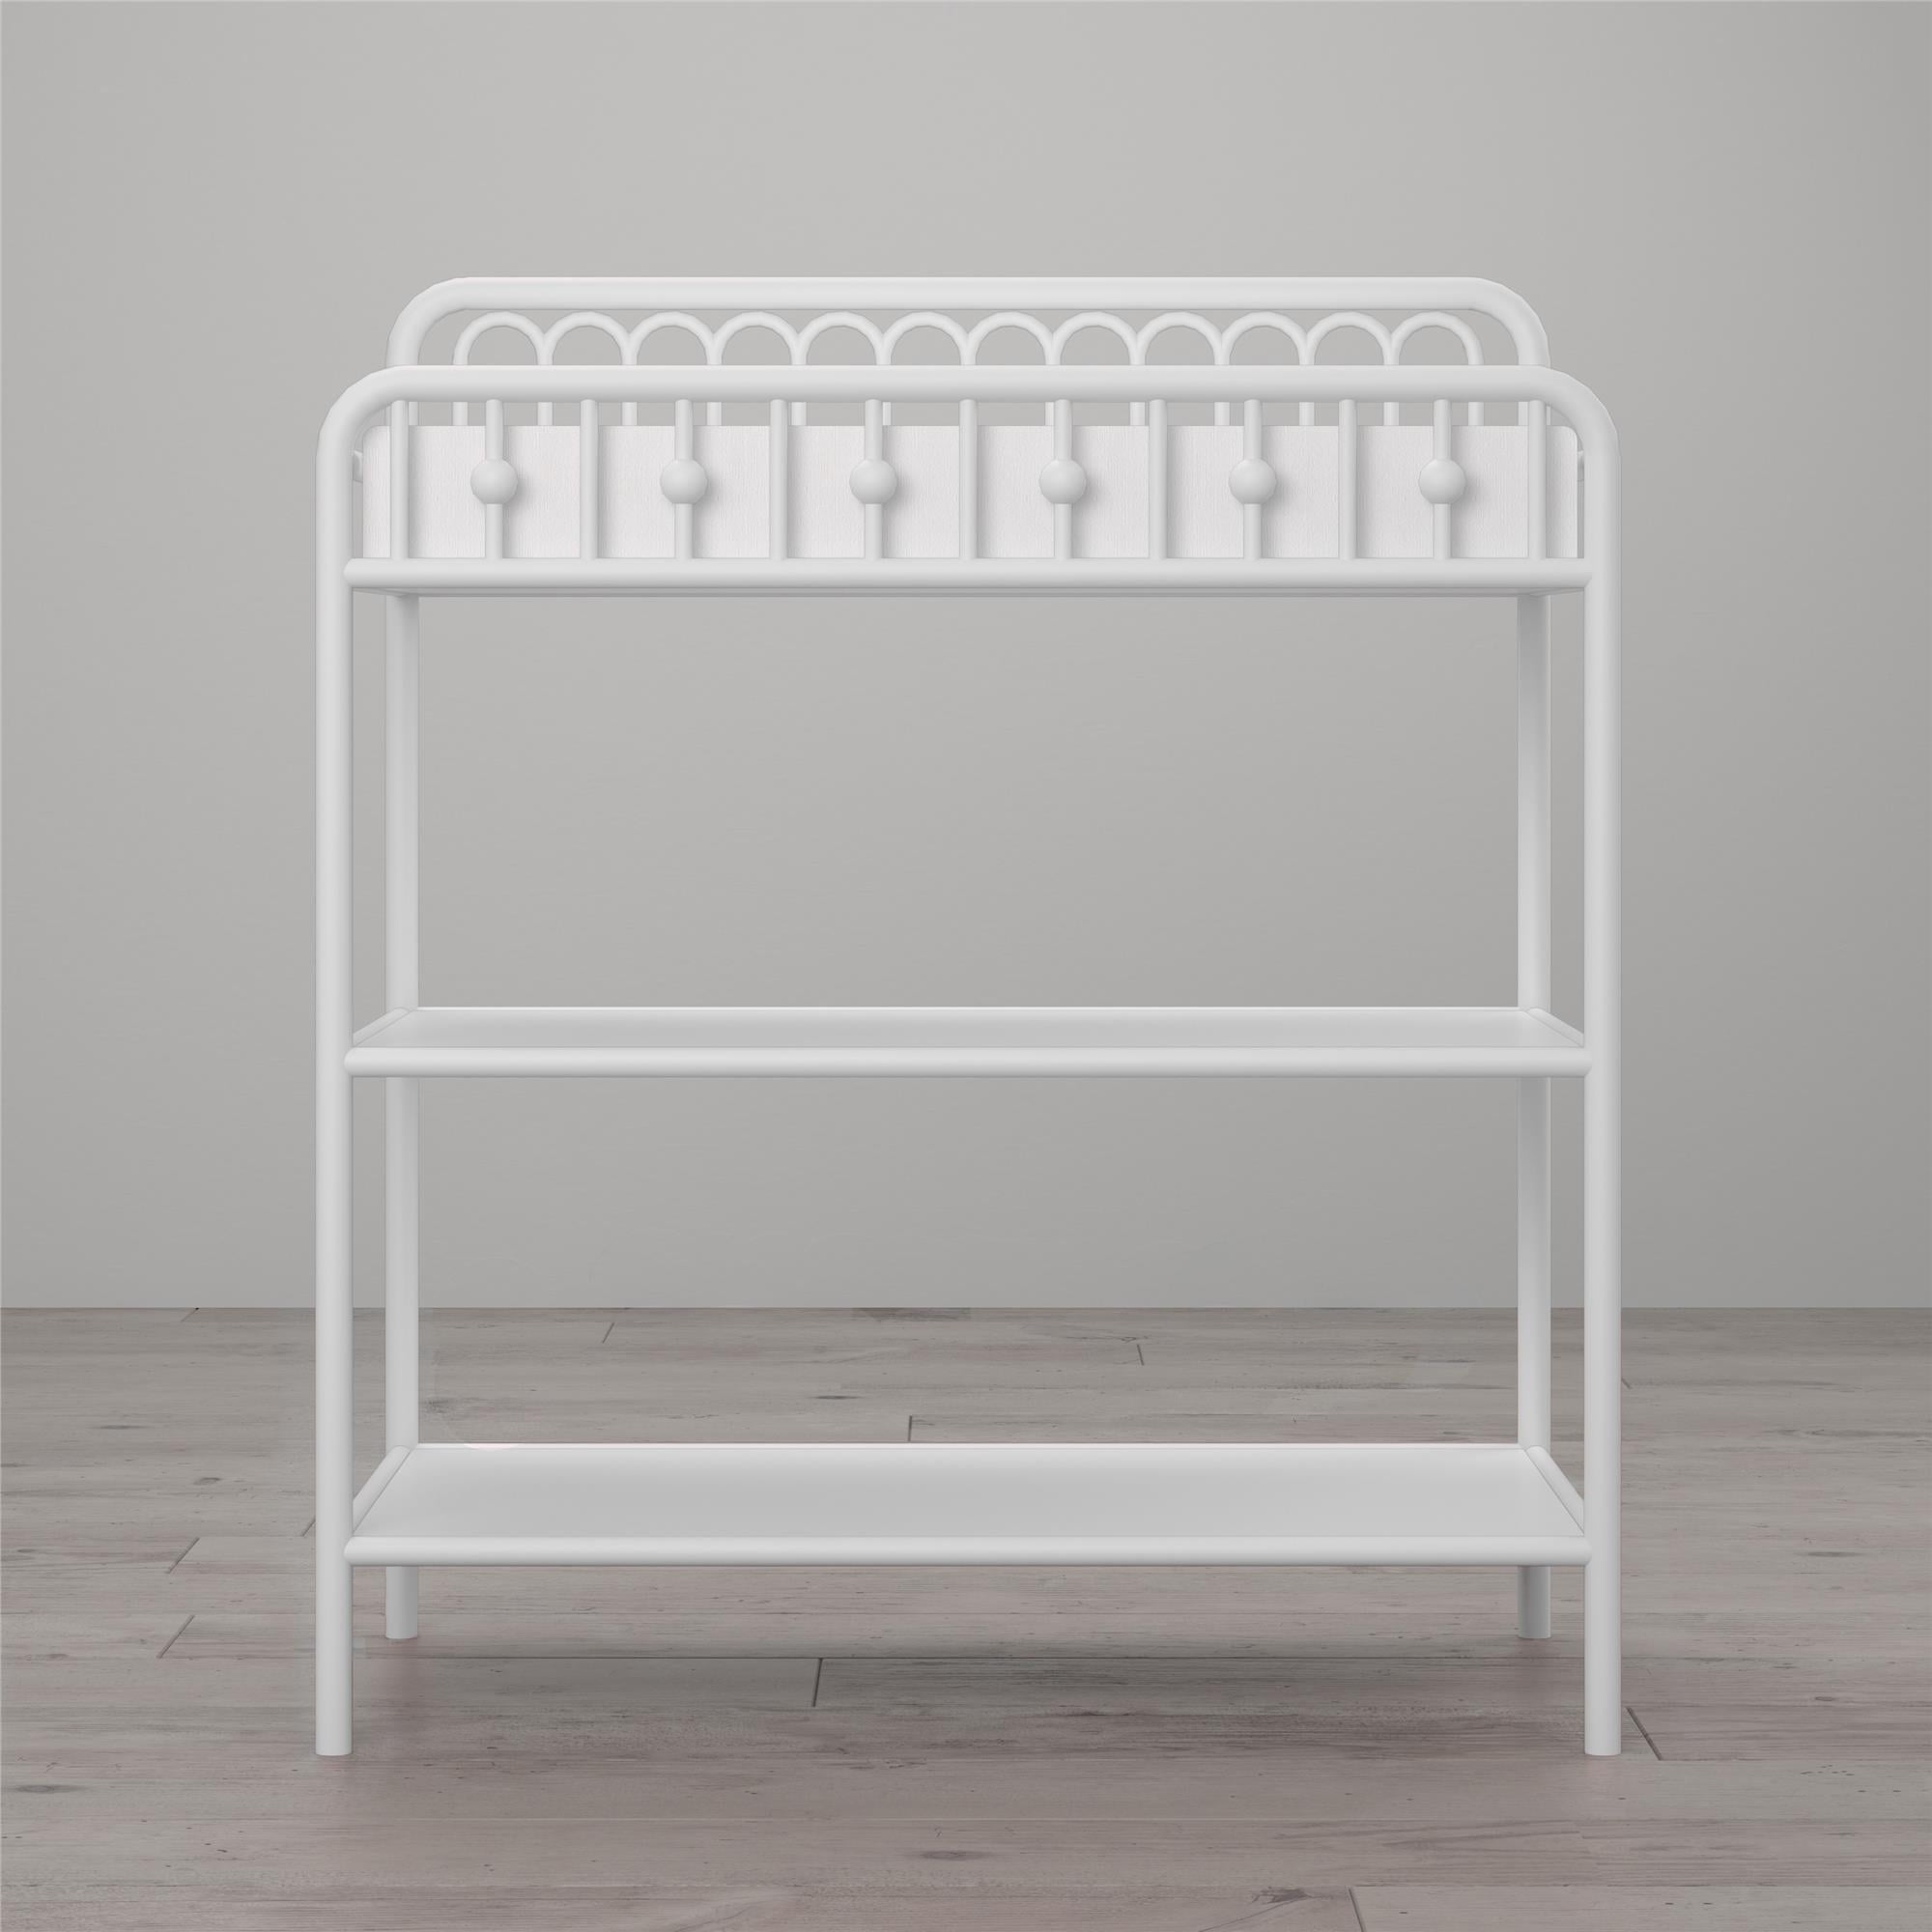 Little Seeds Monarch Hill Ivy Metal Changing Table White 